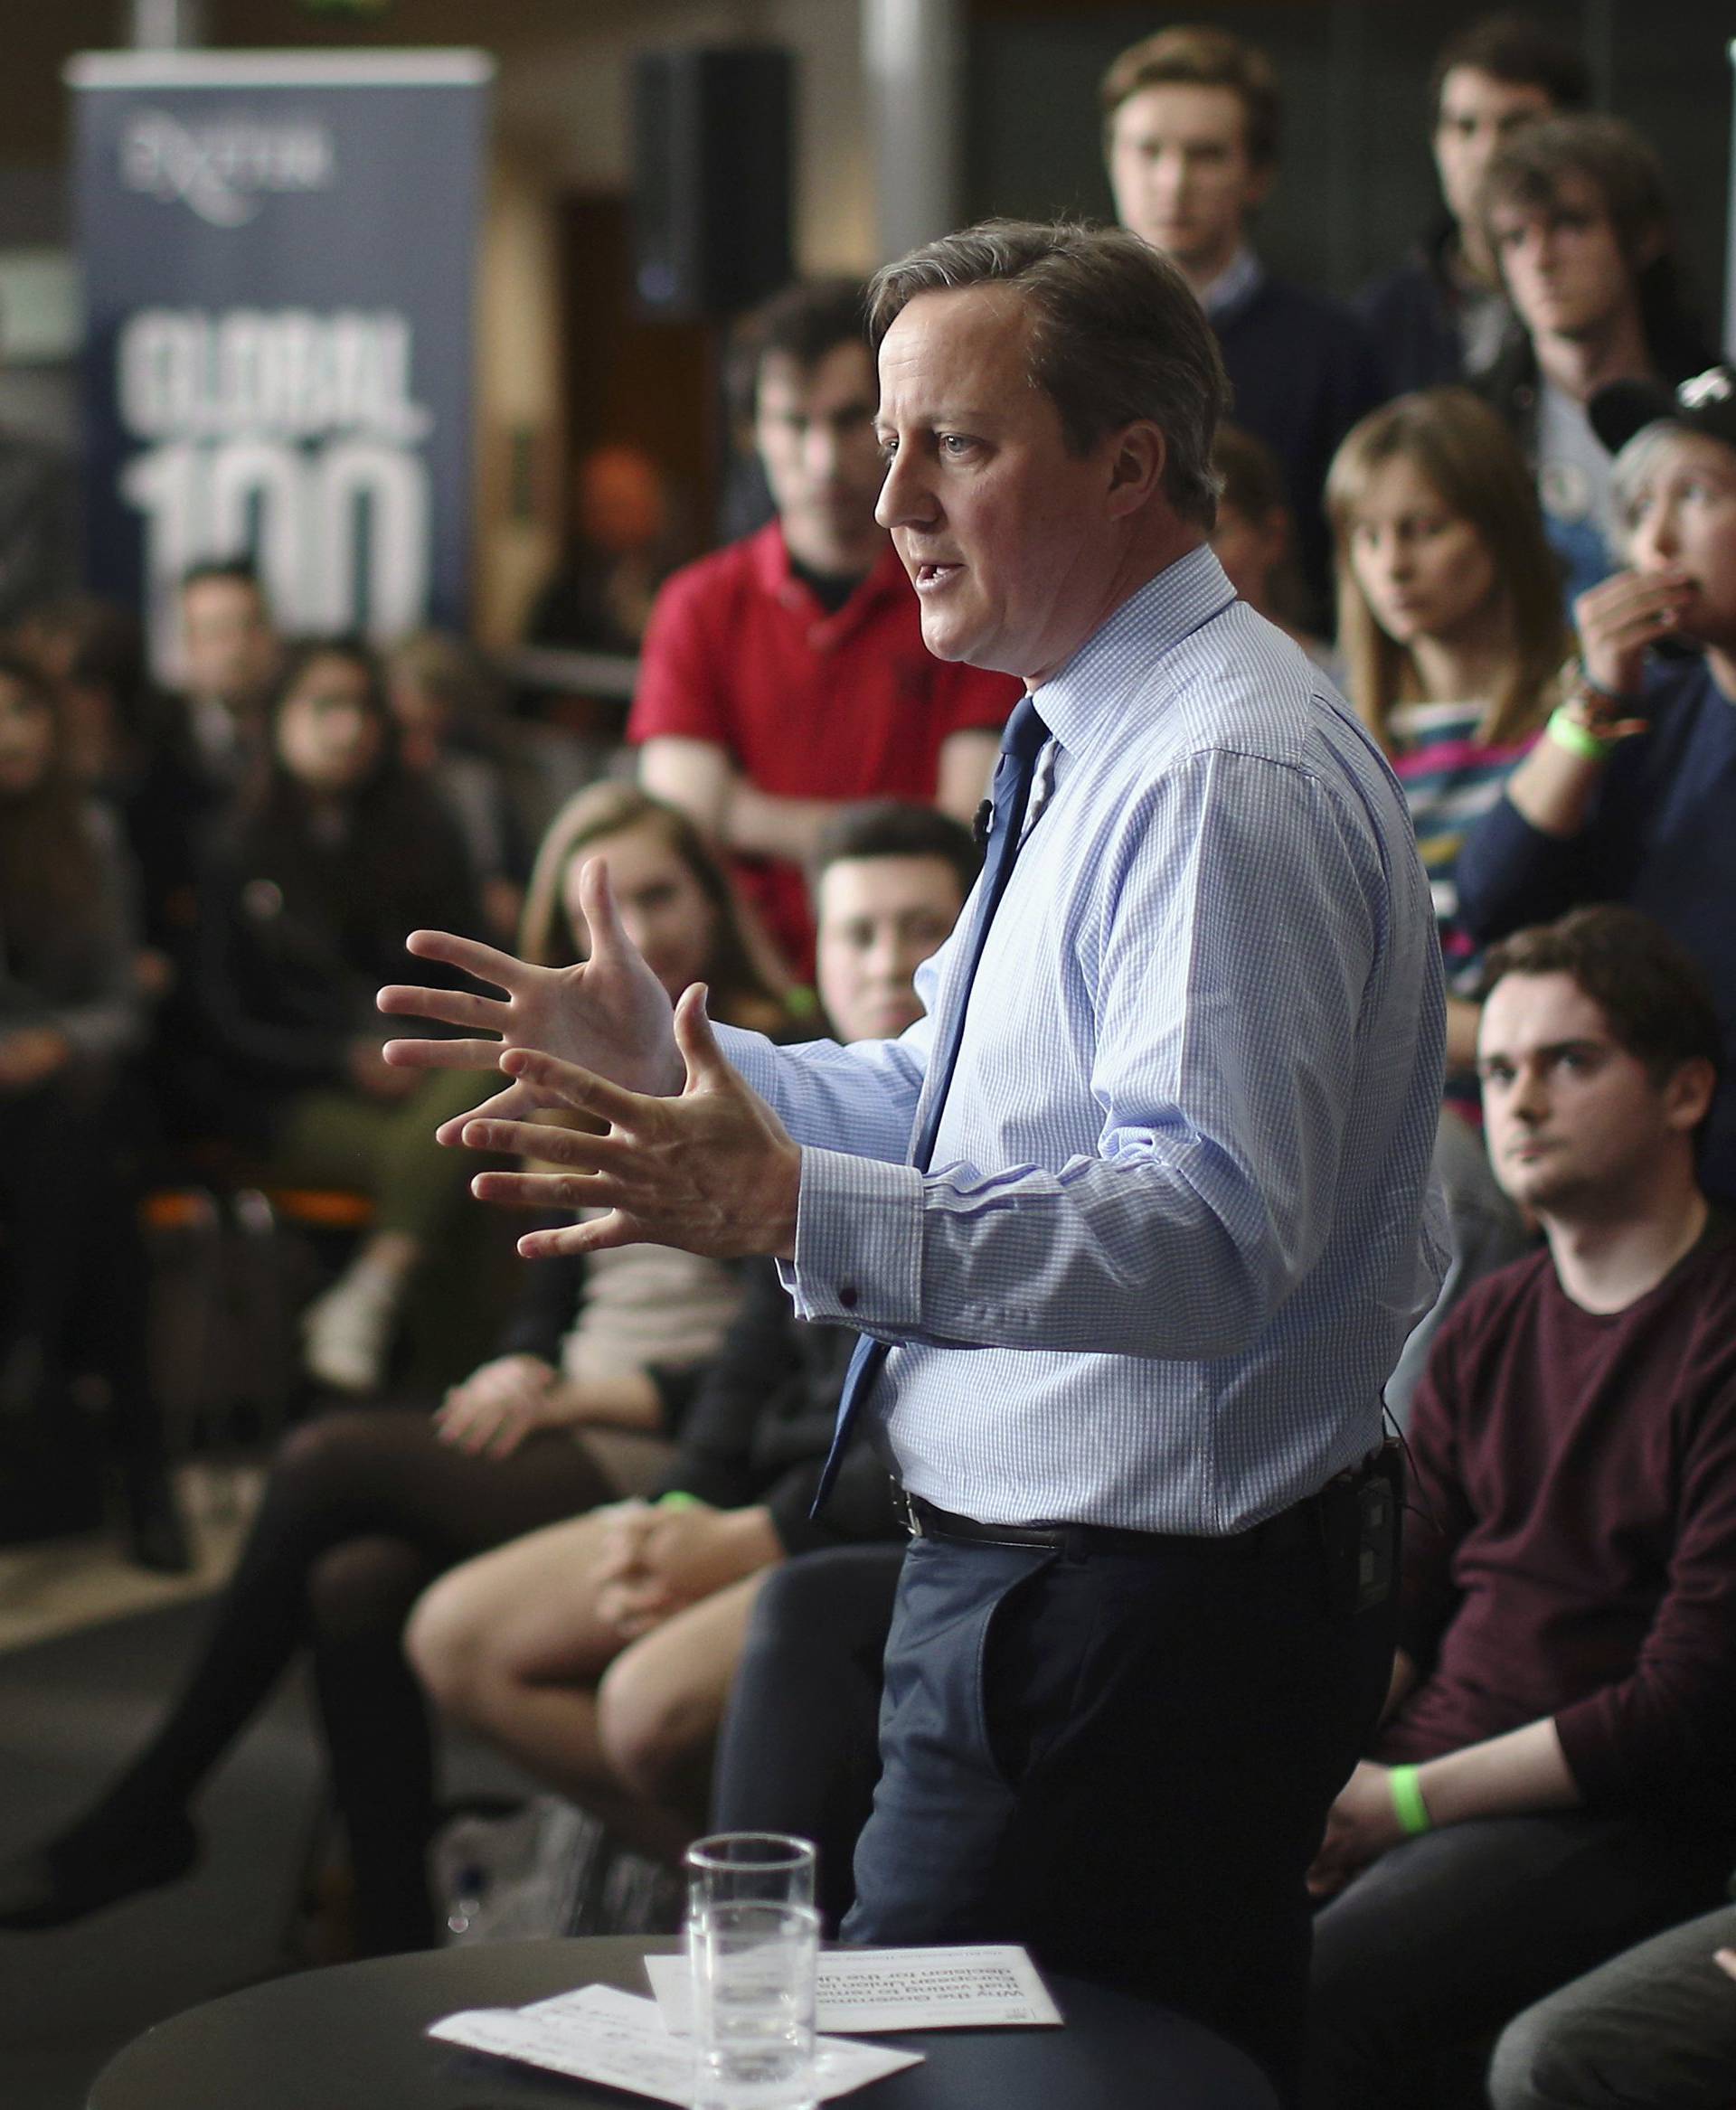 Britain's Prime Minister David Cameron addresses students at Exeter University in Exeter, Britain